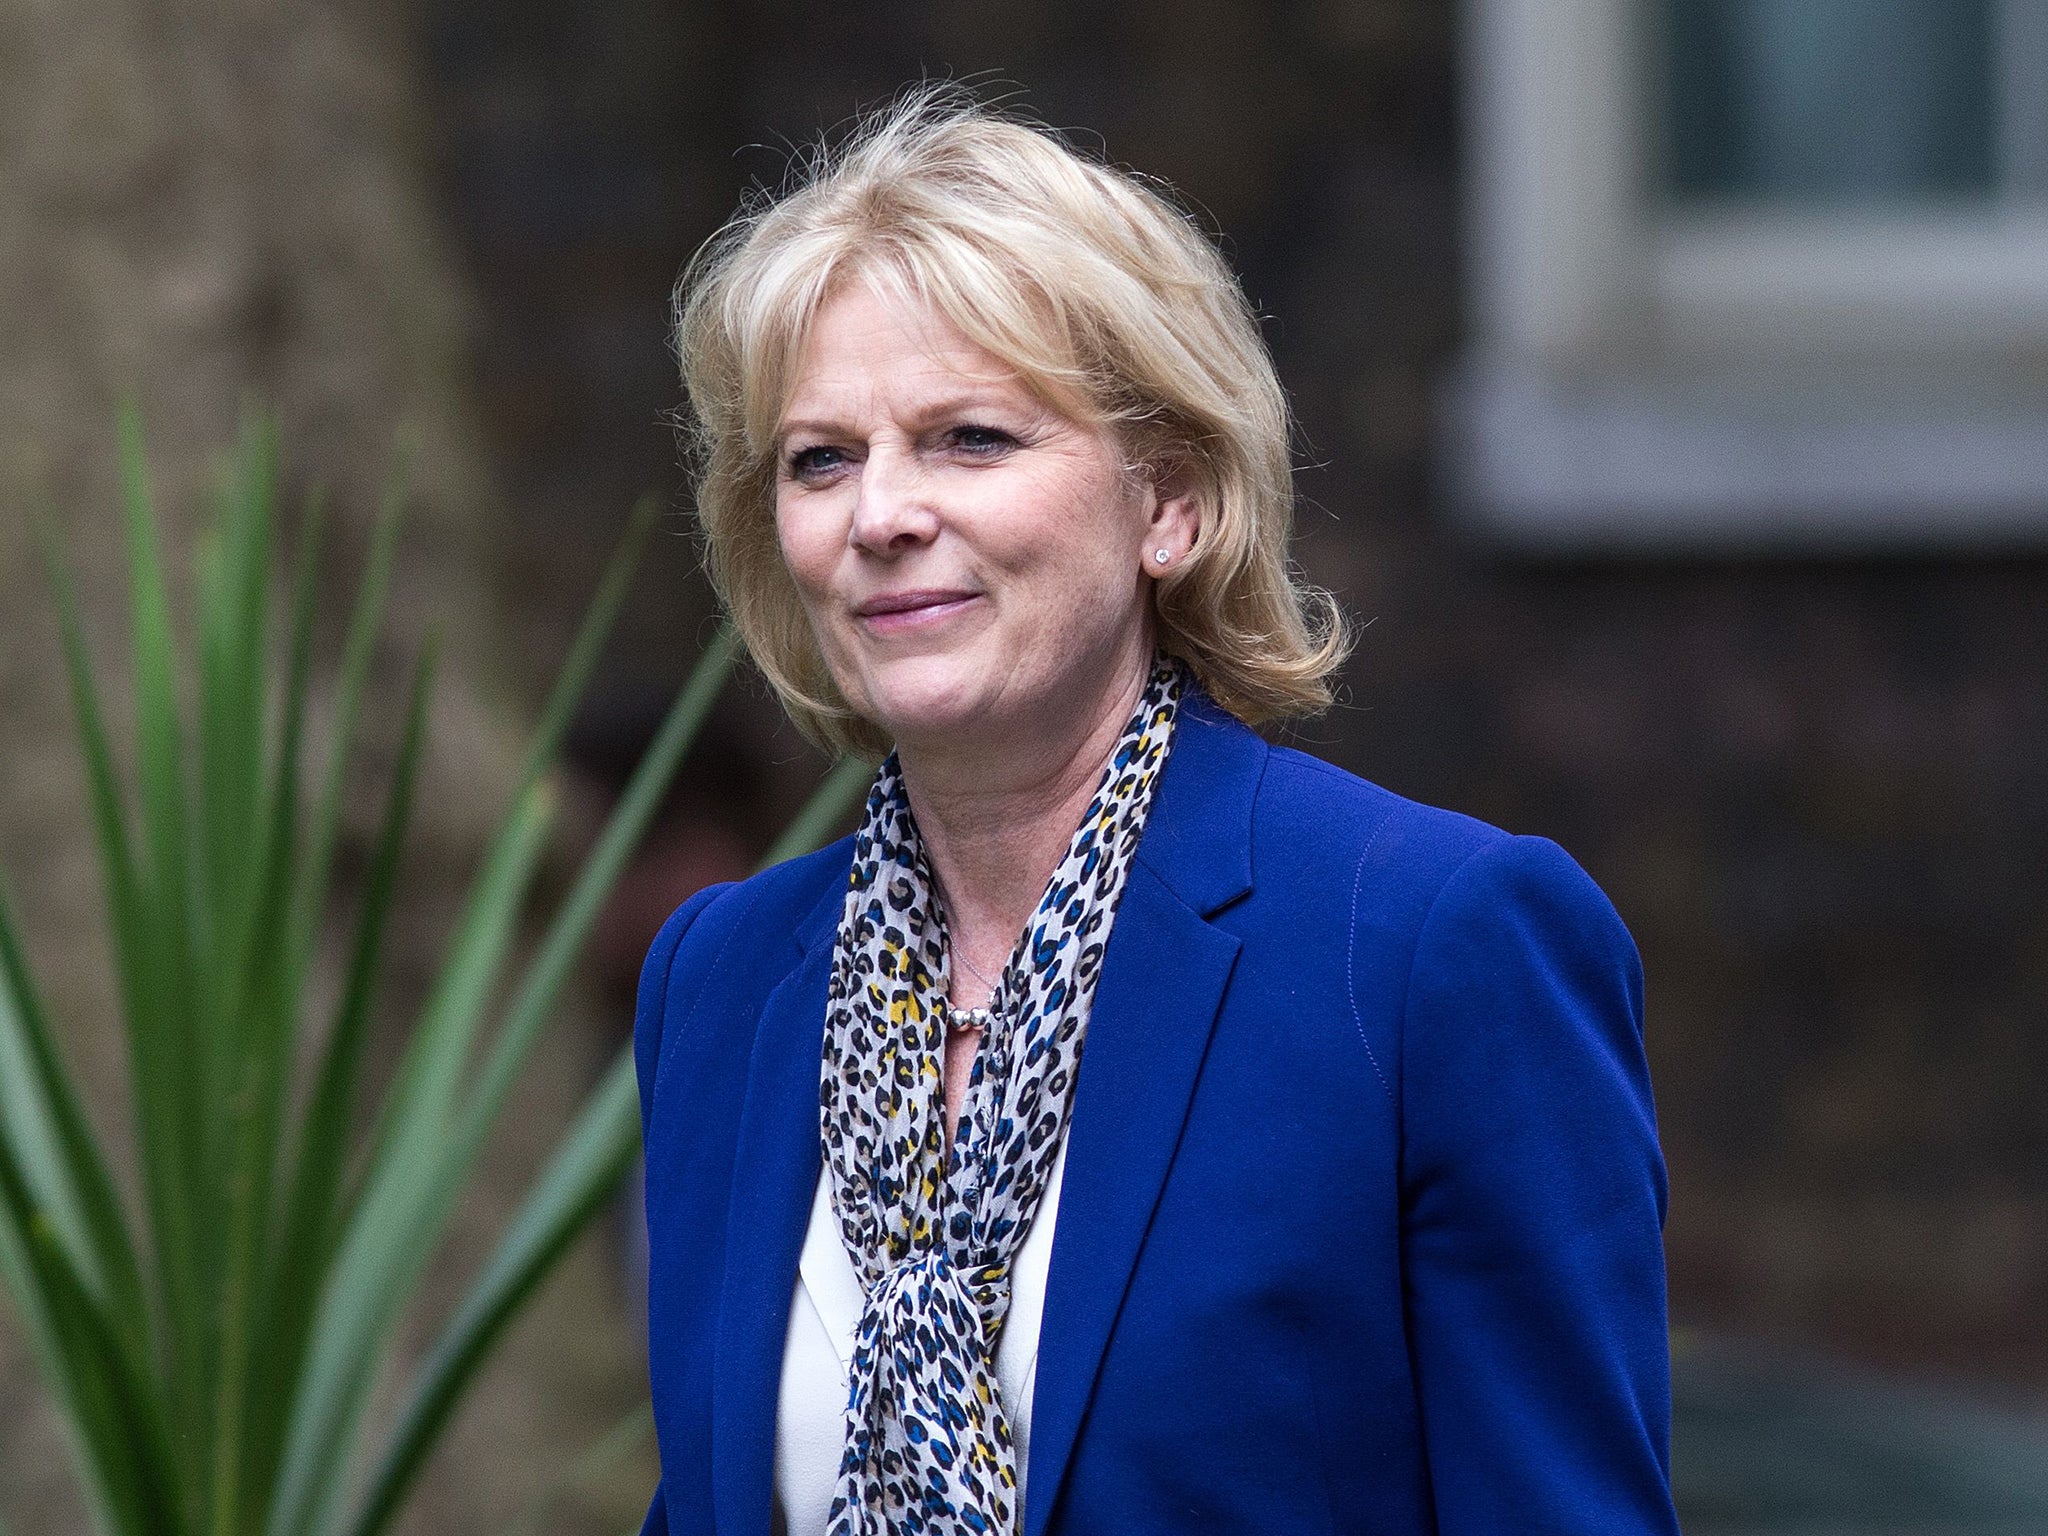 Anna Soubry was a strong Remain supporter